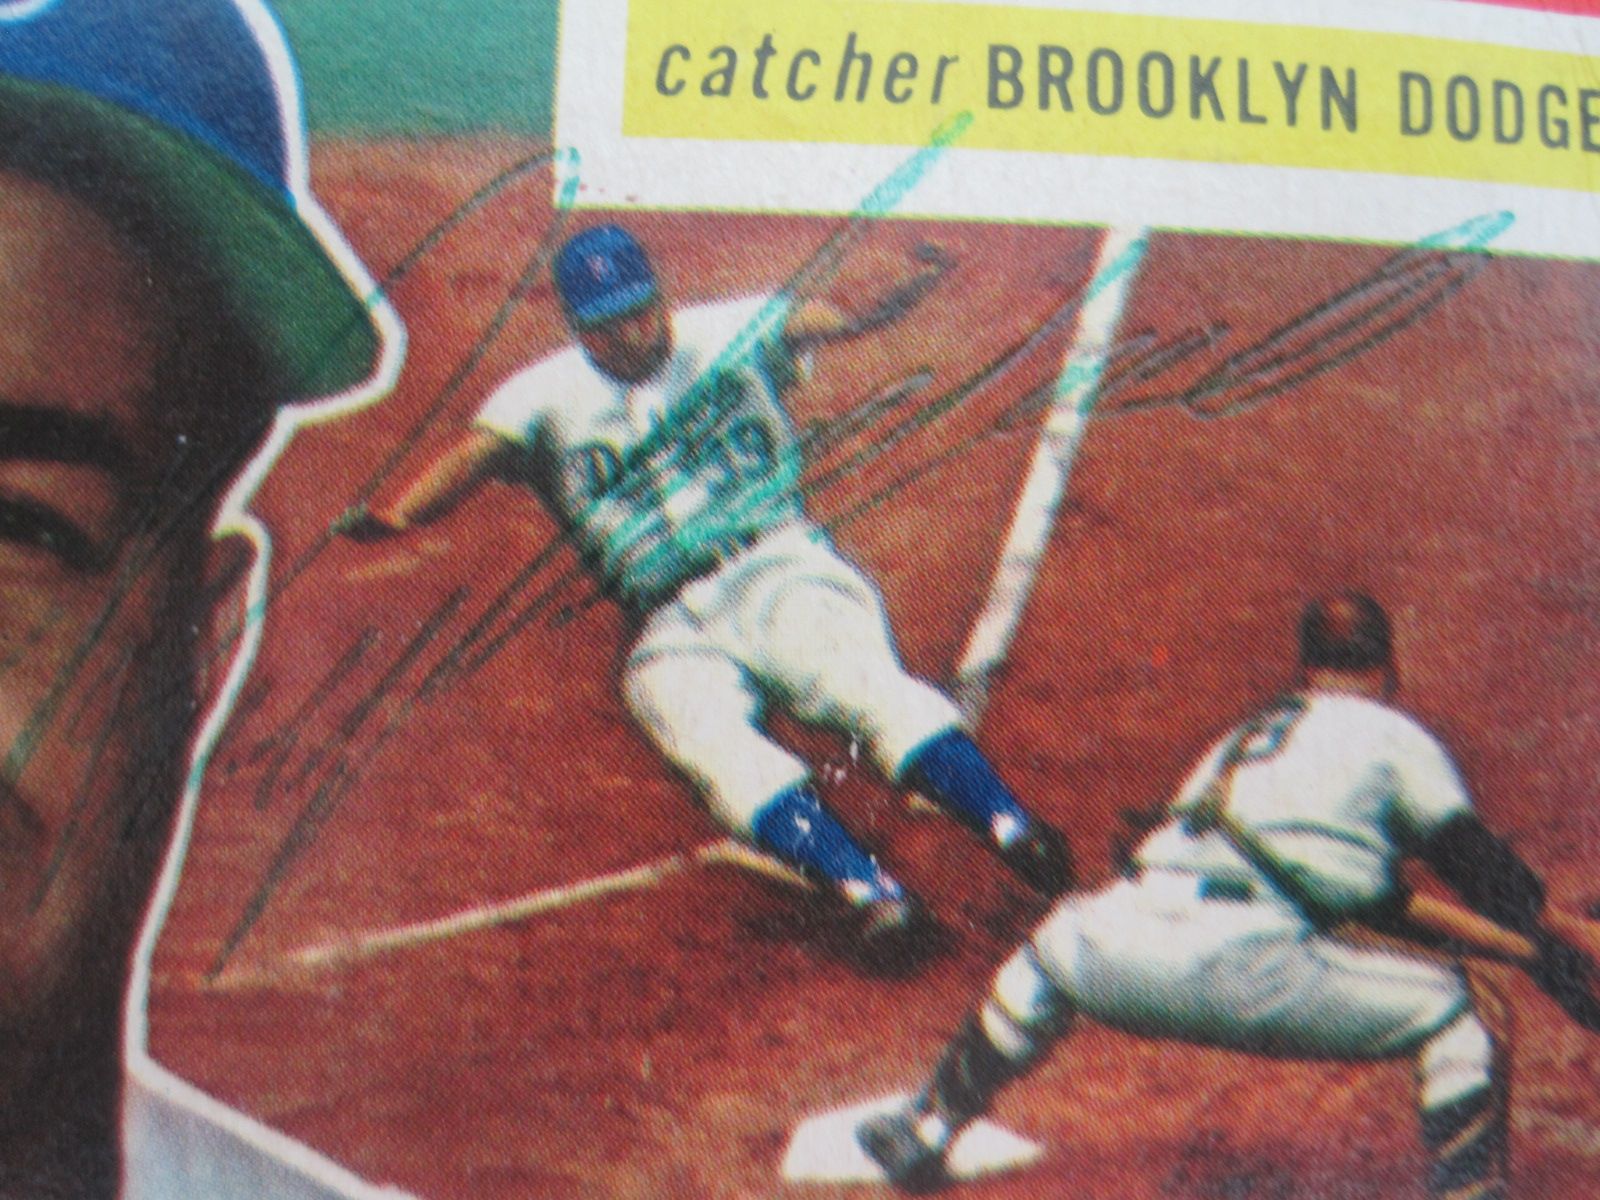 Lot Detail - Roy Campanella Brooklyn Dodgers 1956 Pre-Accident